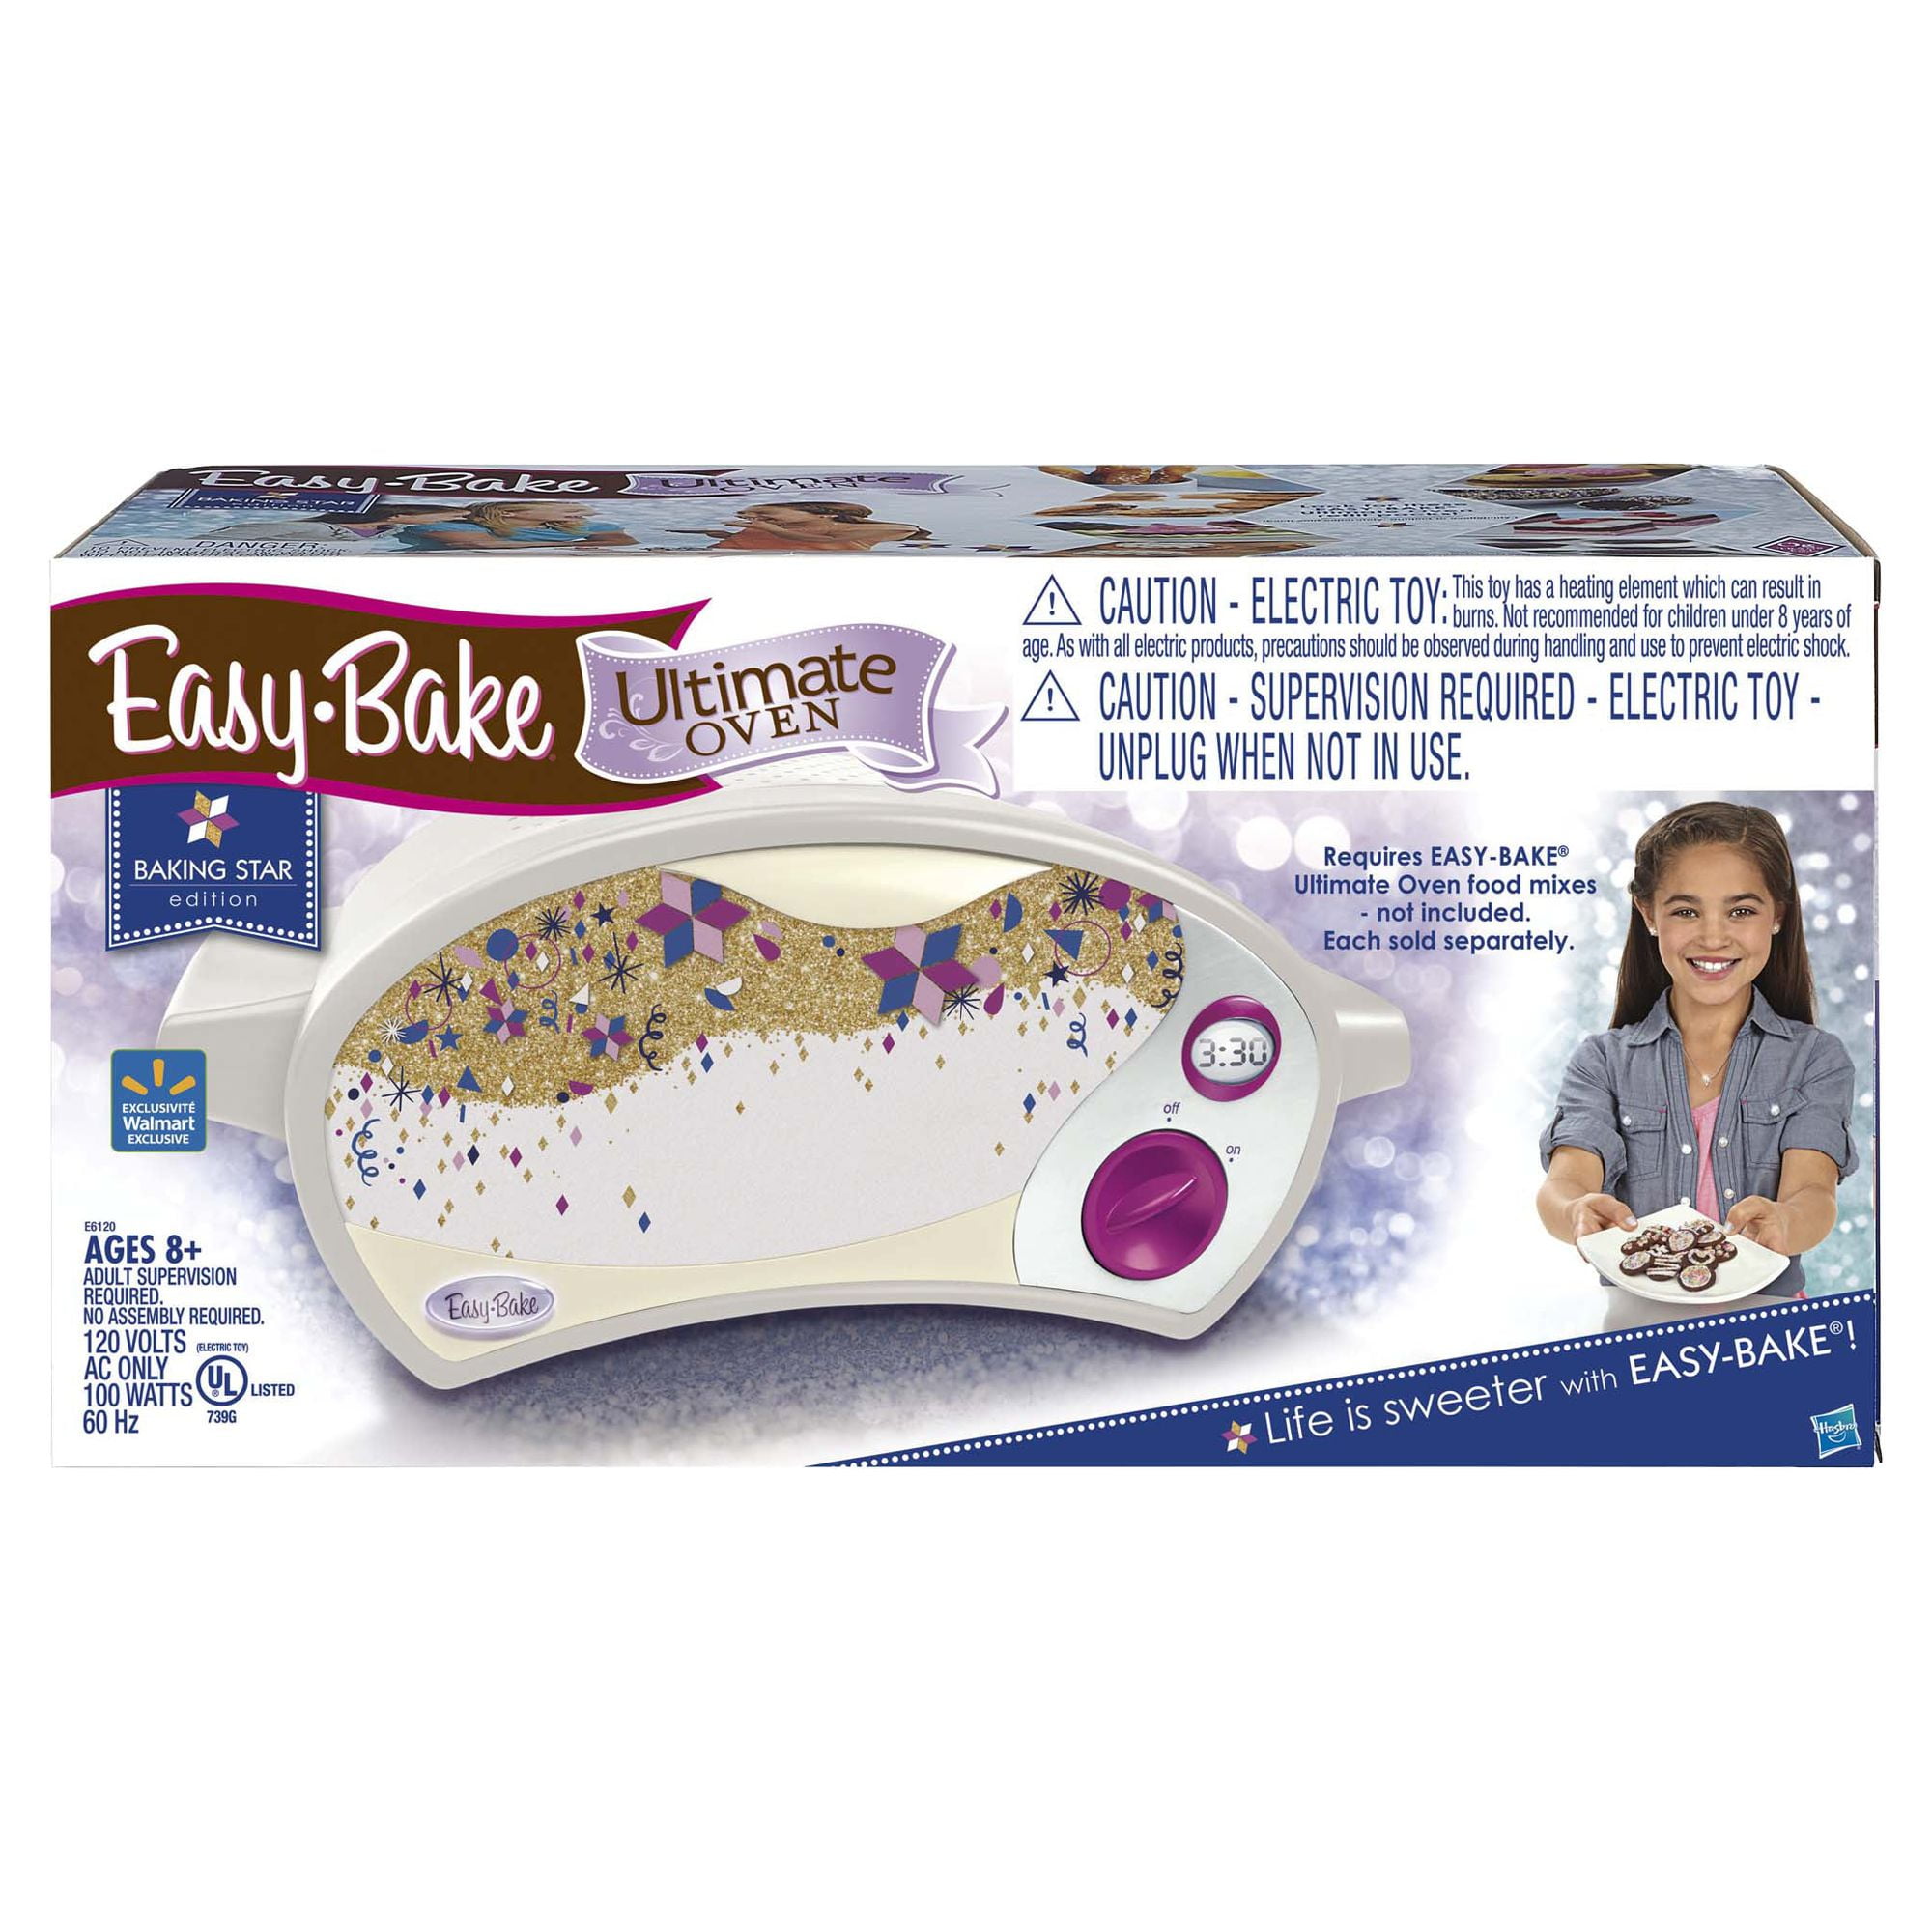 The Easy-Bake Ultimate Oven and a Giveaway